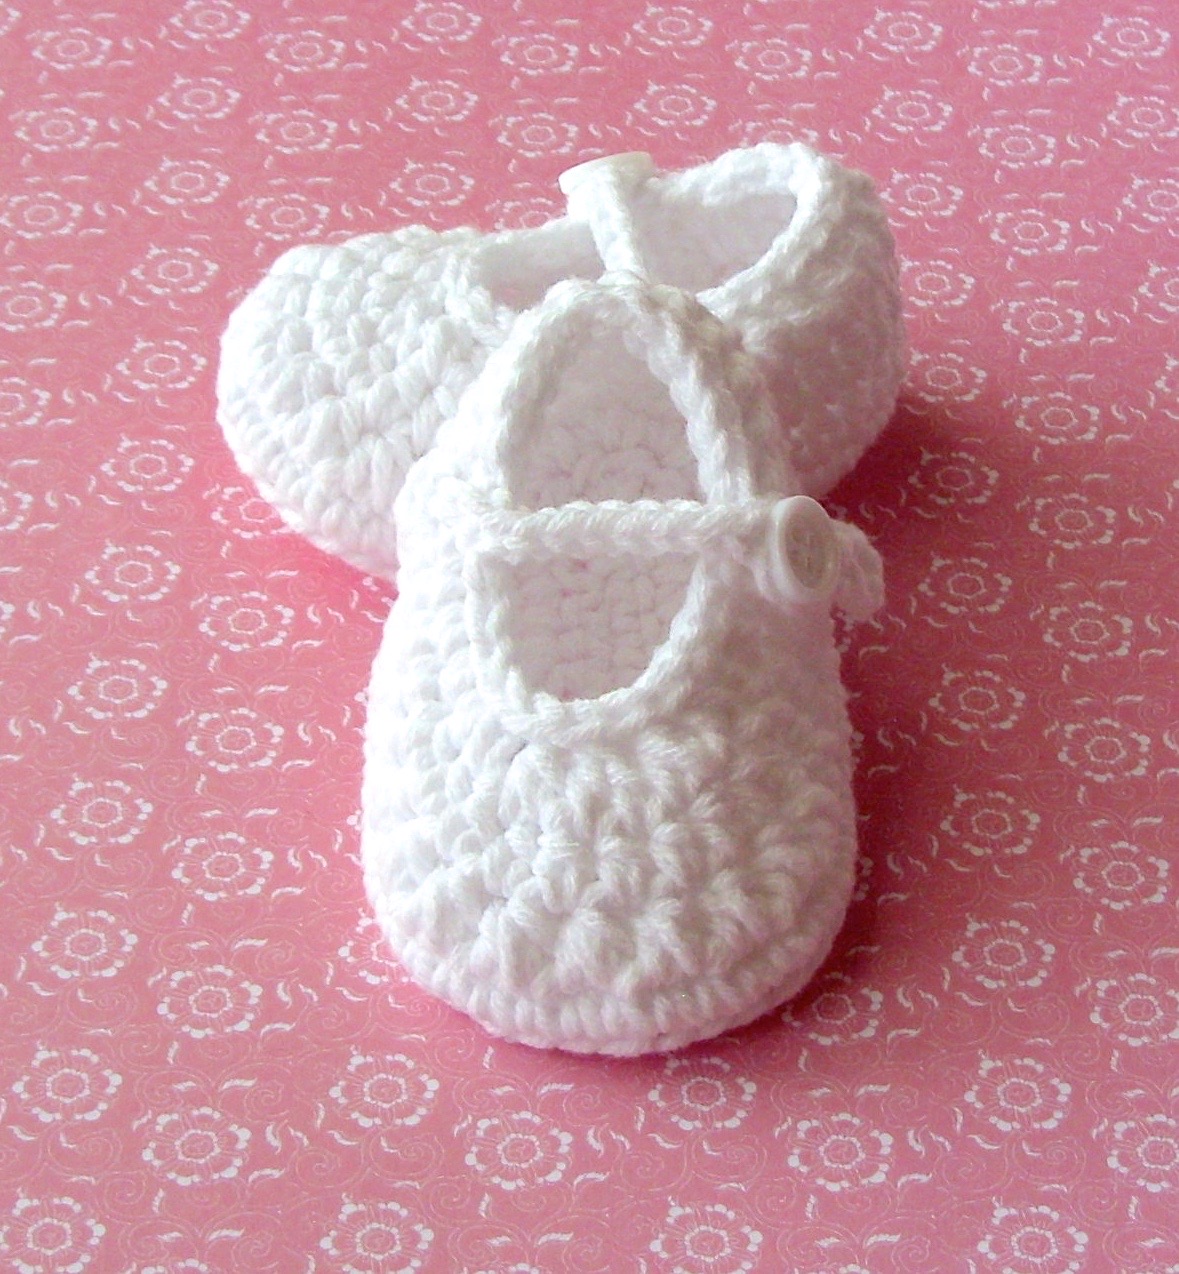 crochet baby shoes crochet Mary Janes; blush pink baby shoes uk seller flower baby slippers; ready to ship baby girl shoes baby booties Shoes Girls Shoes Mary Janes 